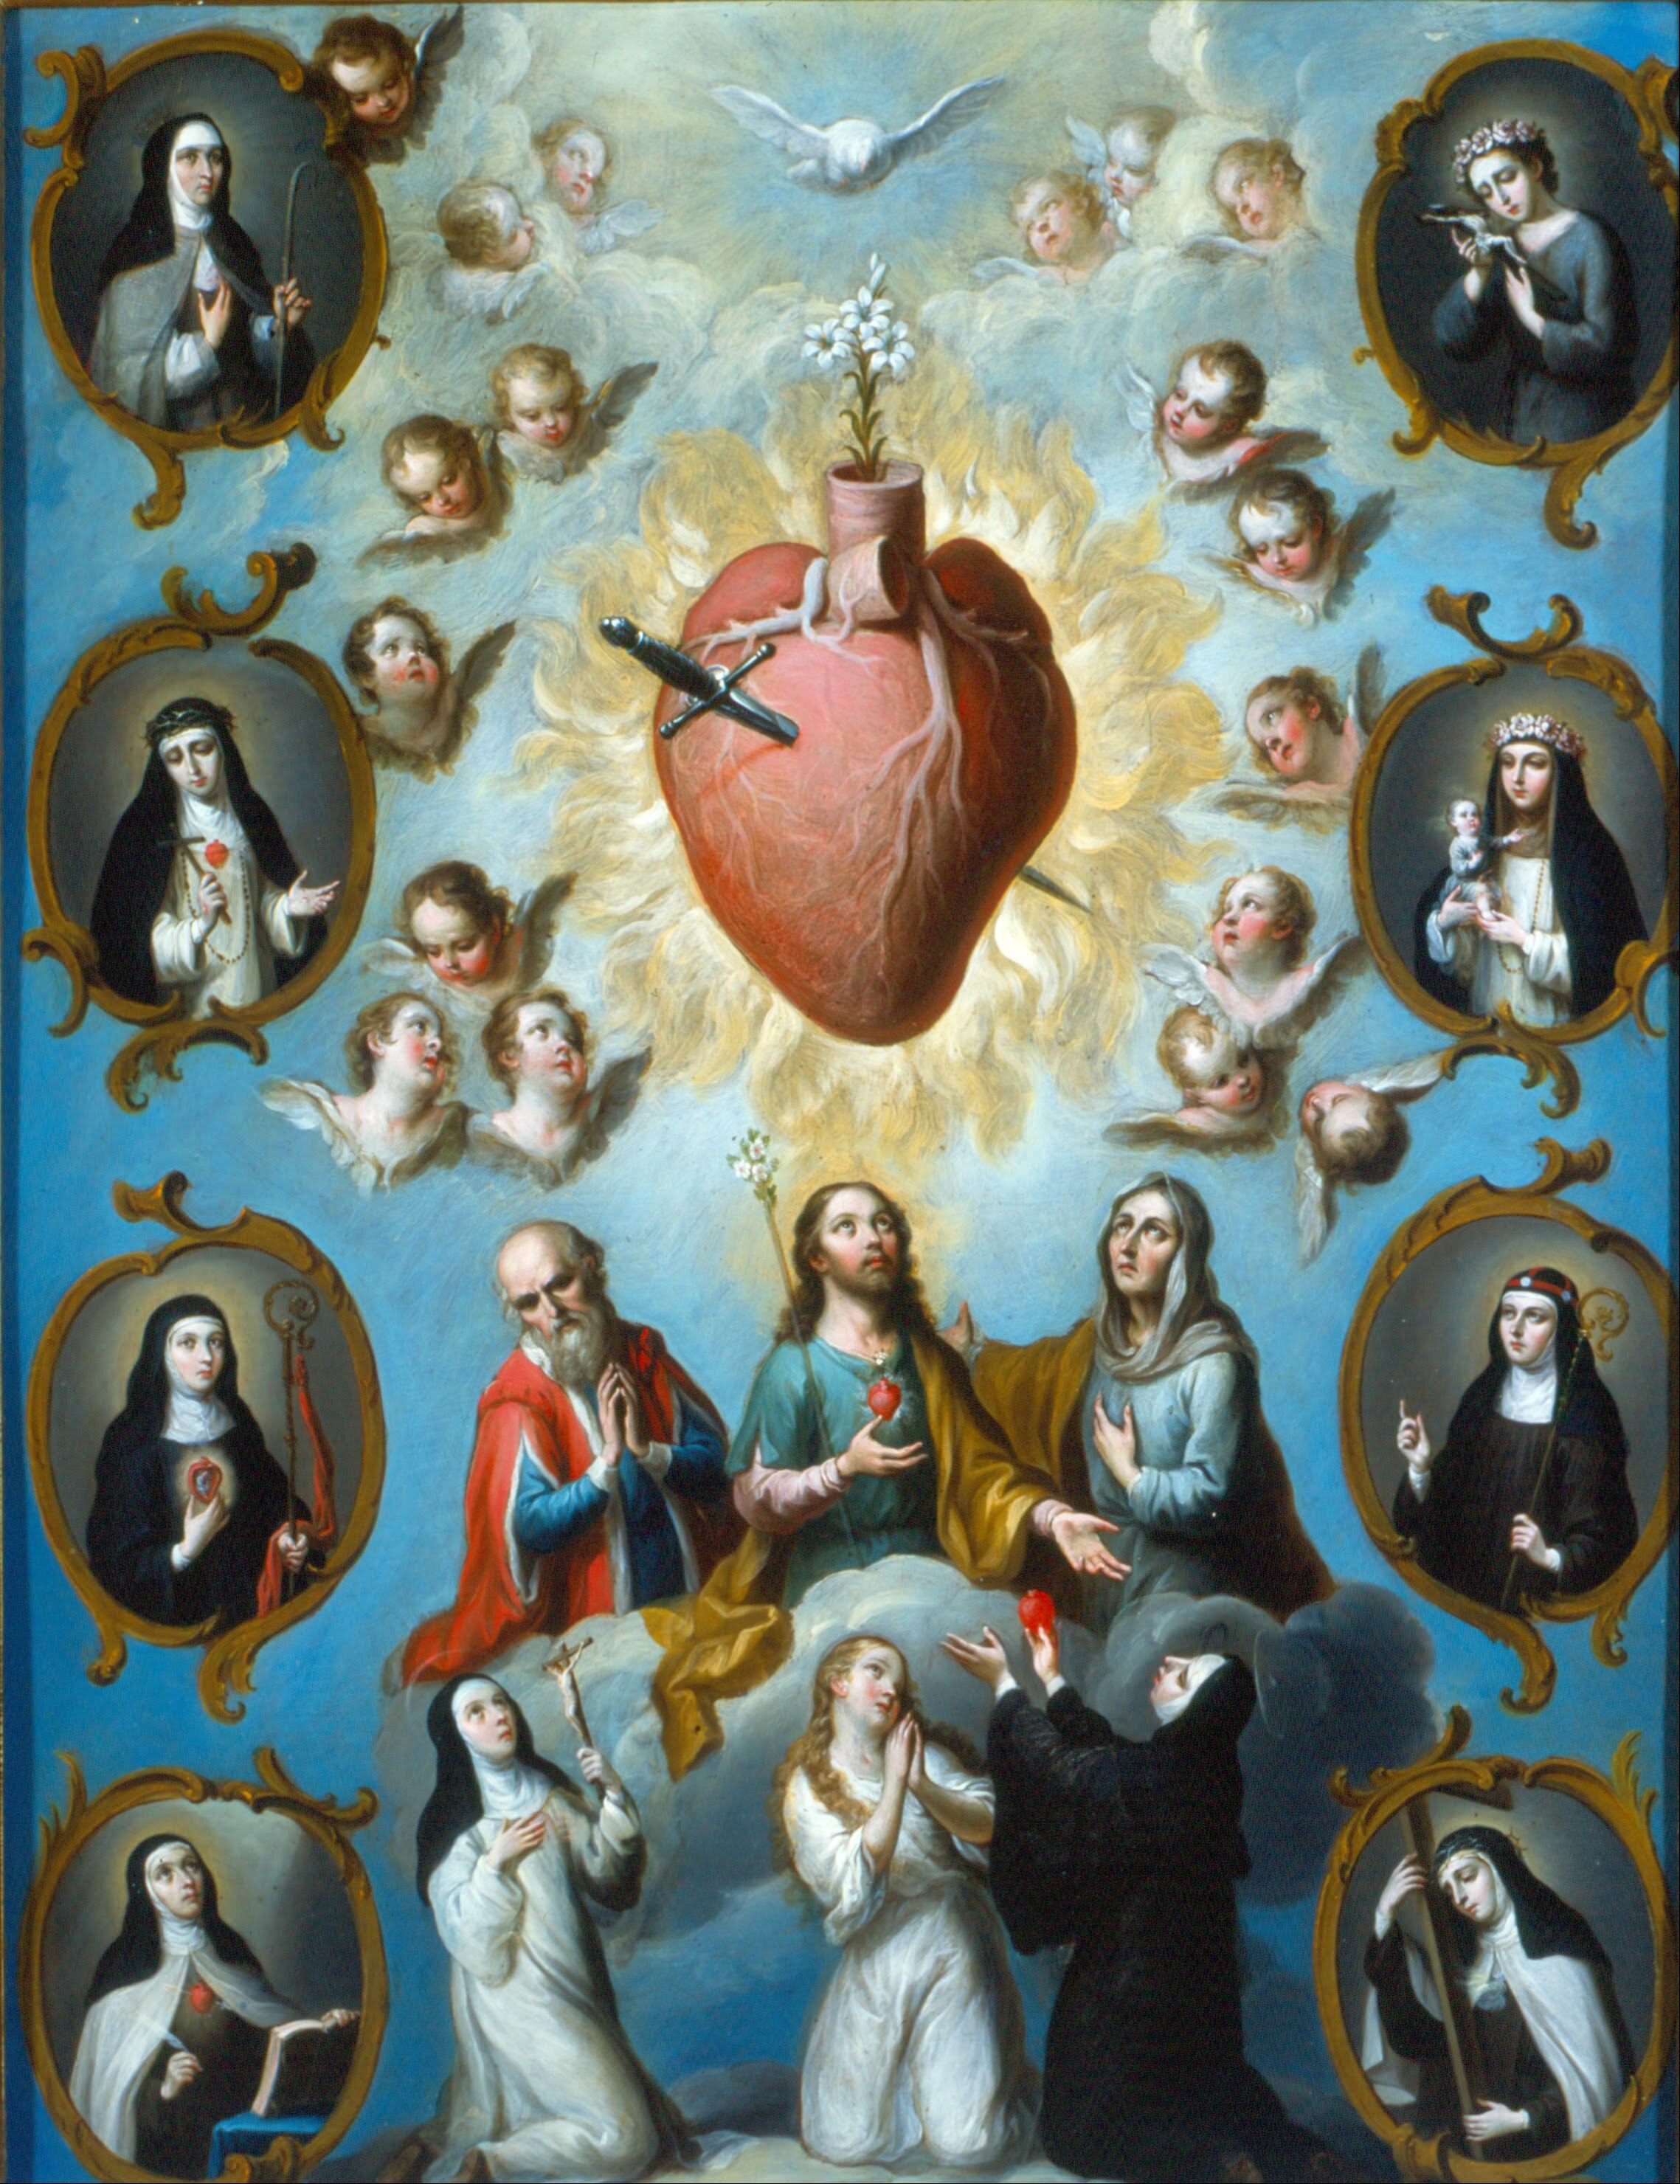 A religious painting showing an anatomical heart being speared by a sword, mary and Jesus and others watching